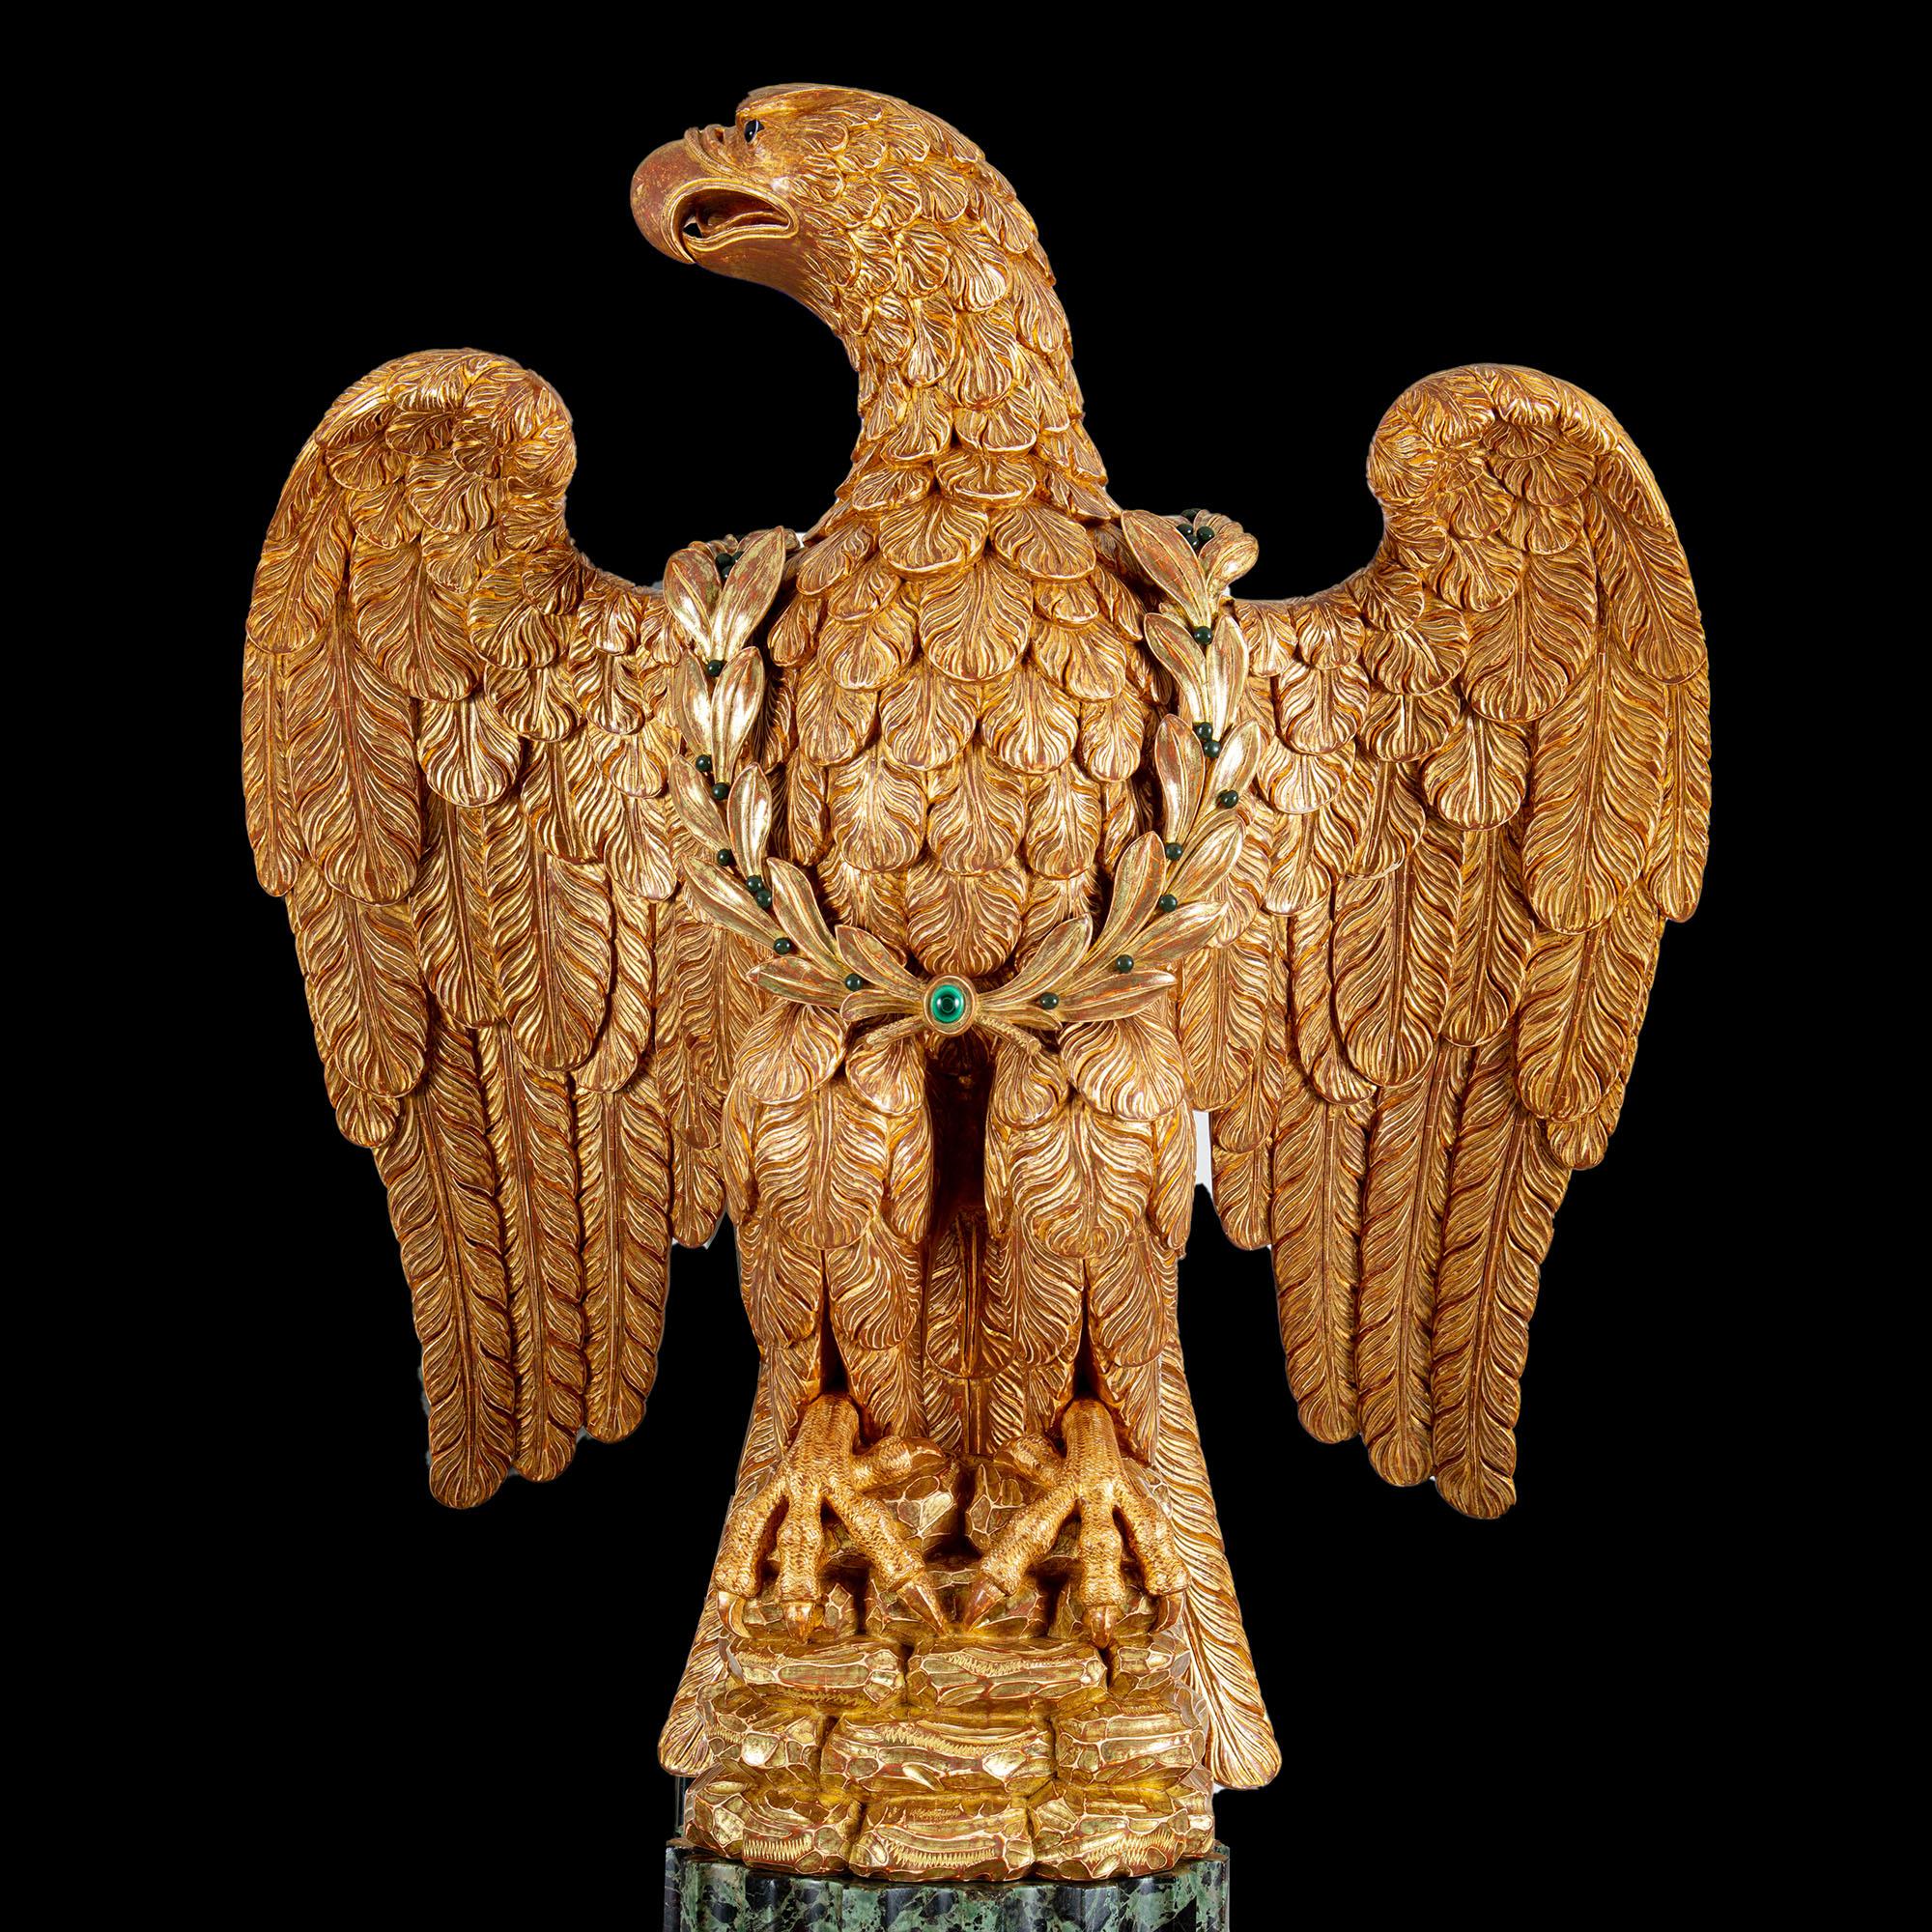 Giltwood Carved Eagle on Verde Antico Fluted Marble Column In Excellent Condition For Sale In London, by appointment only